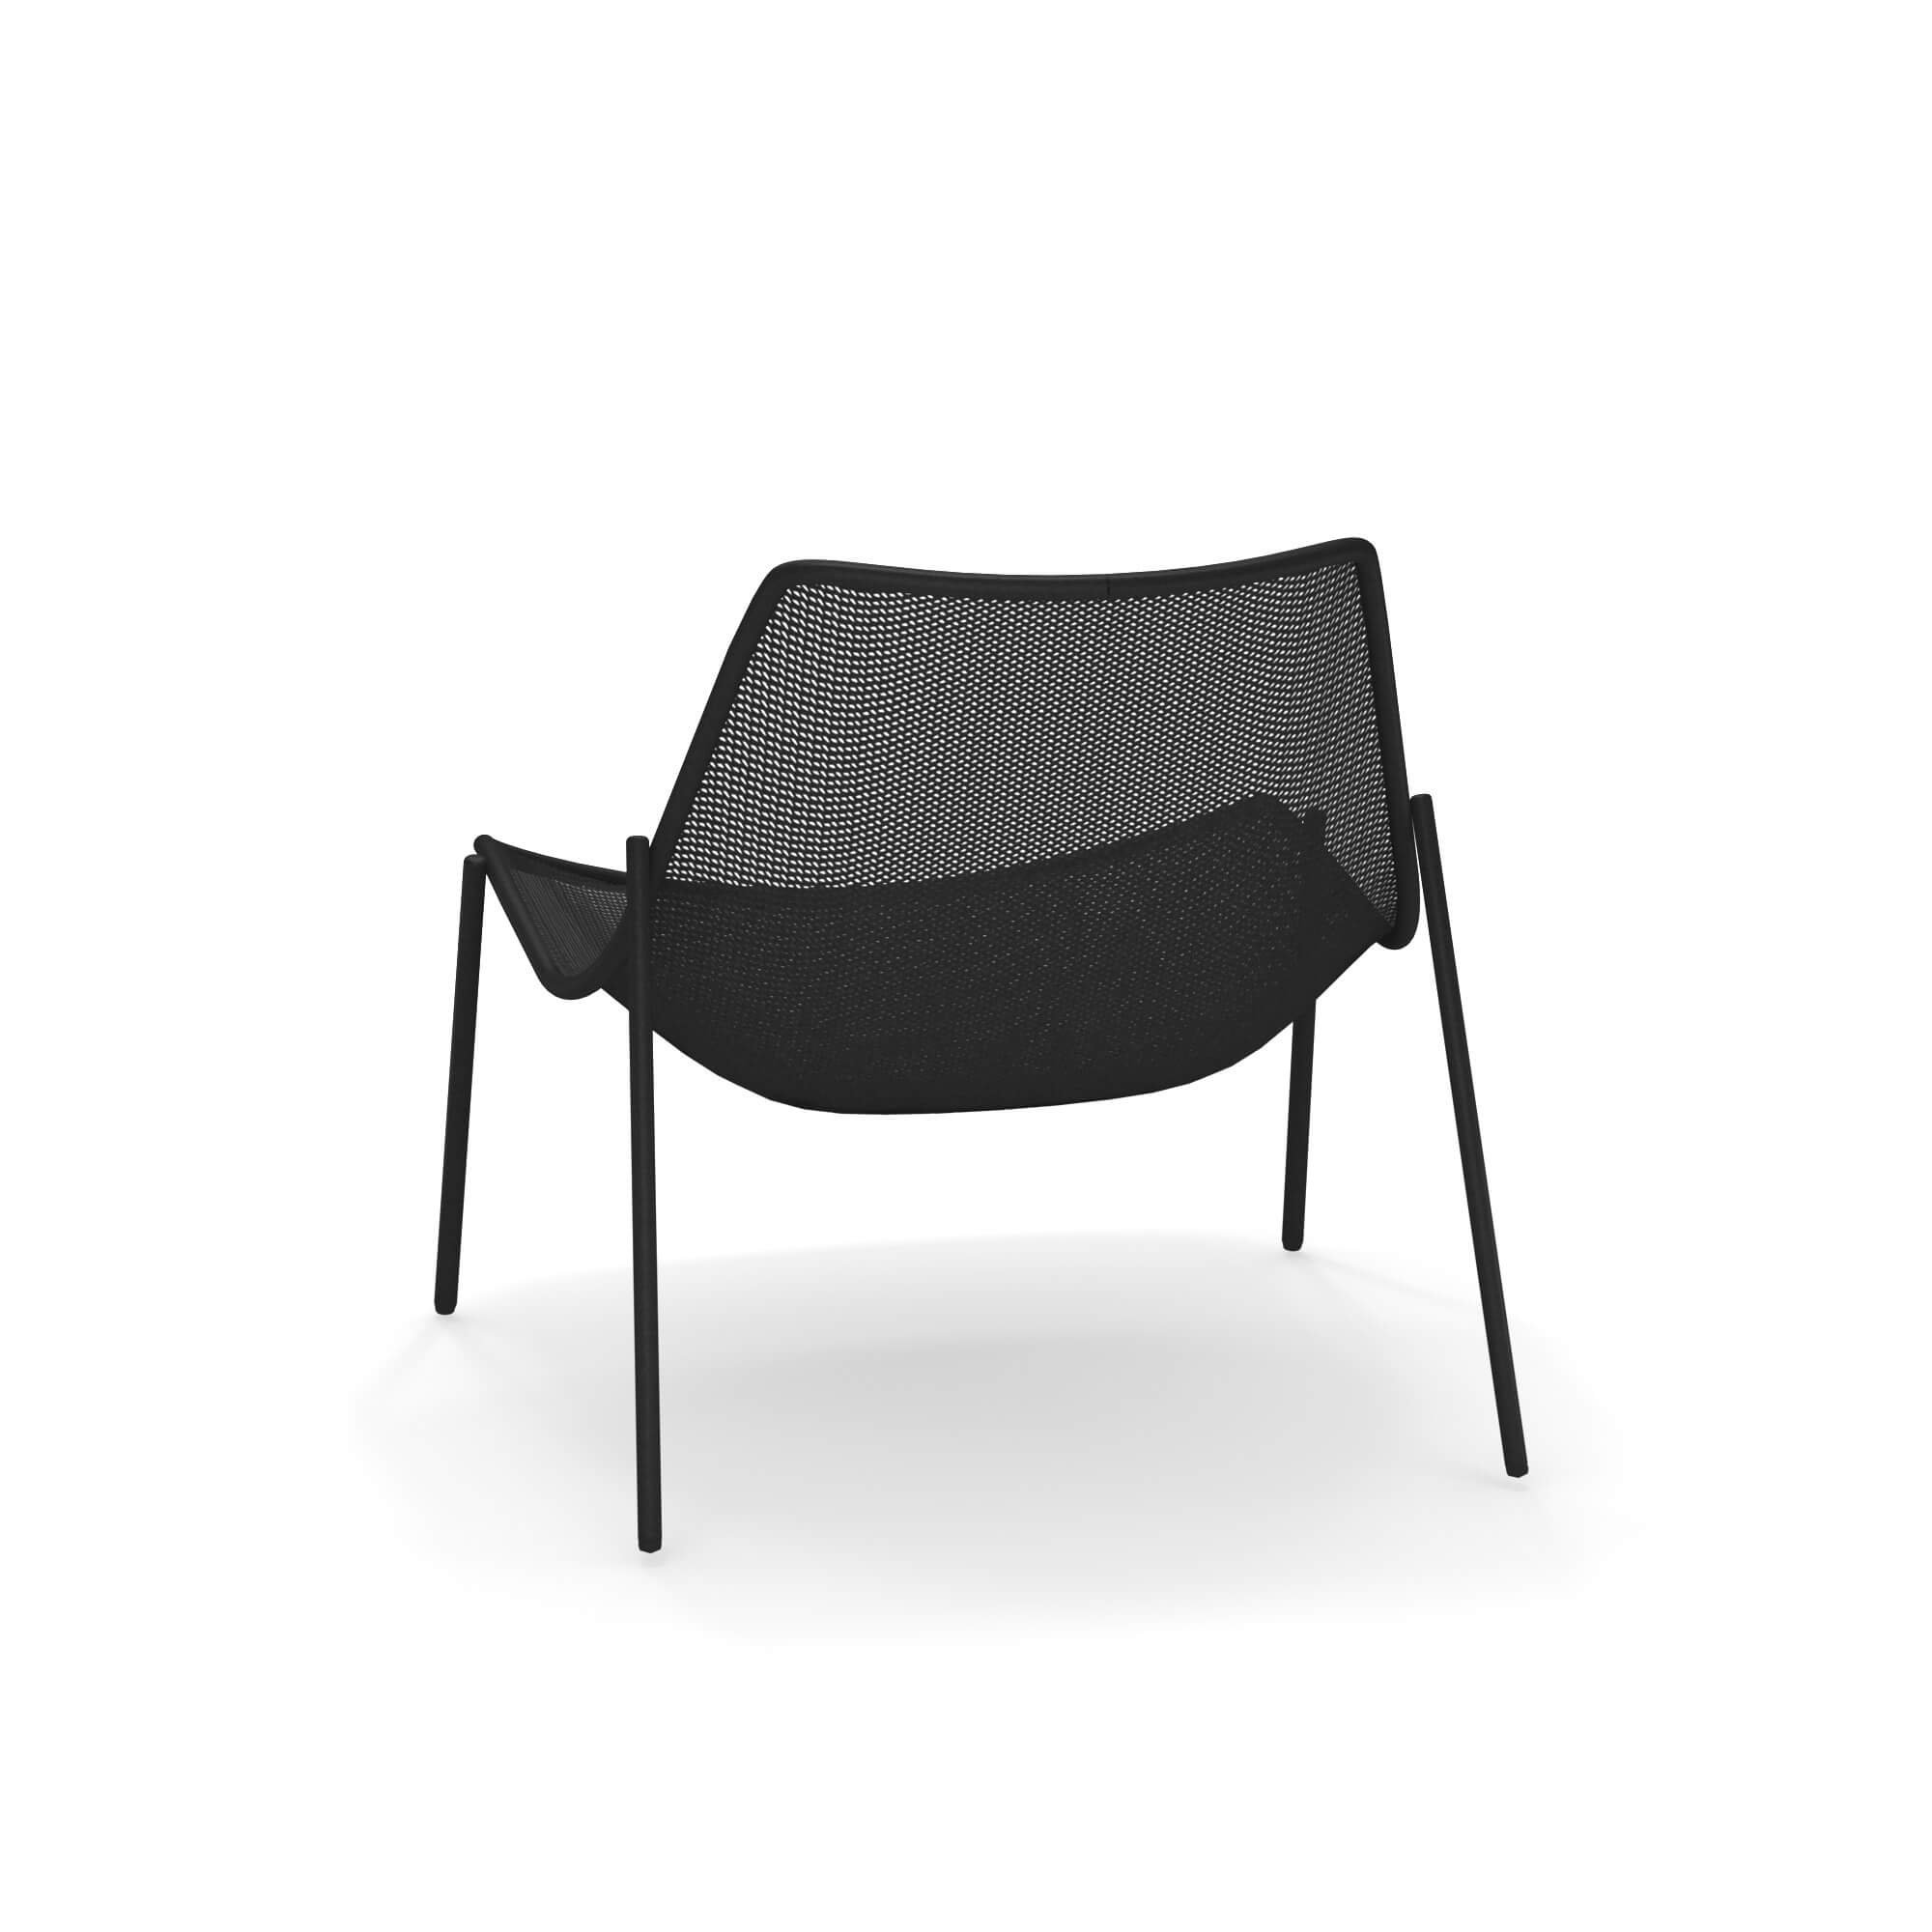 Round Lounge Chair from Emu, designed by Christophe Pillet